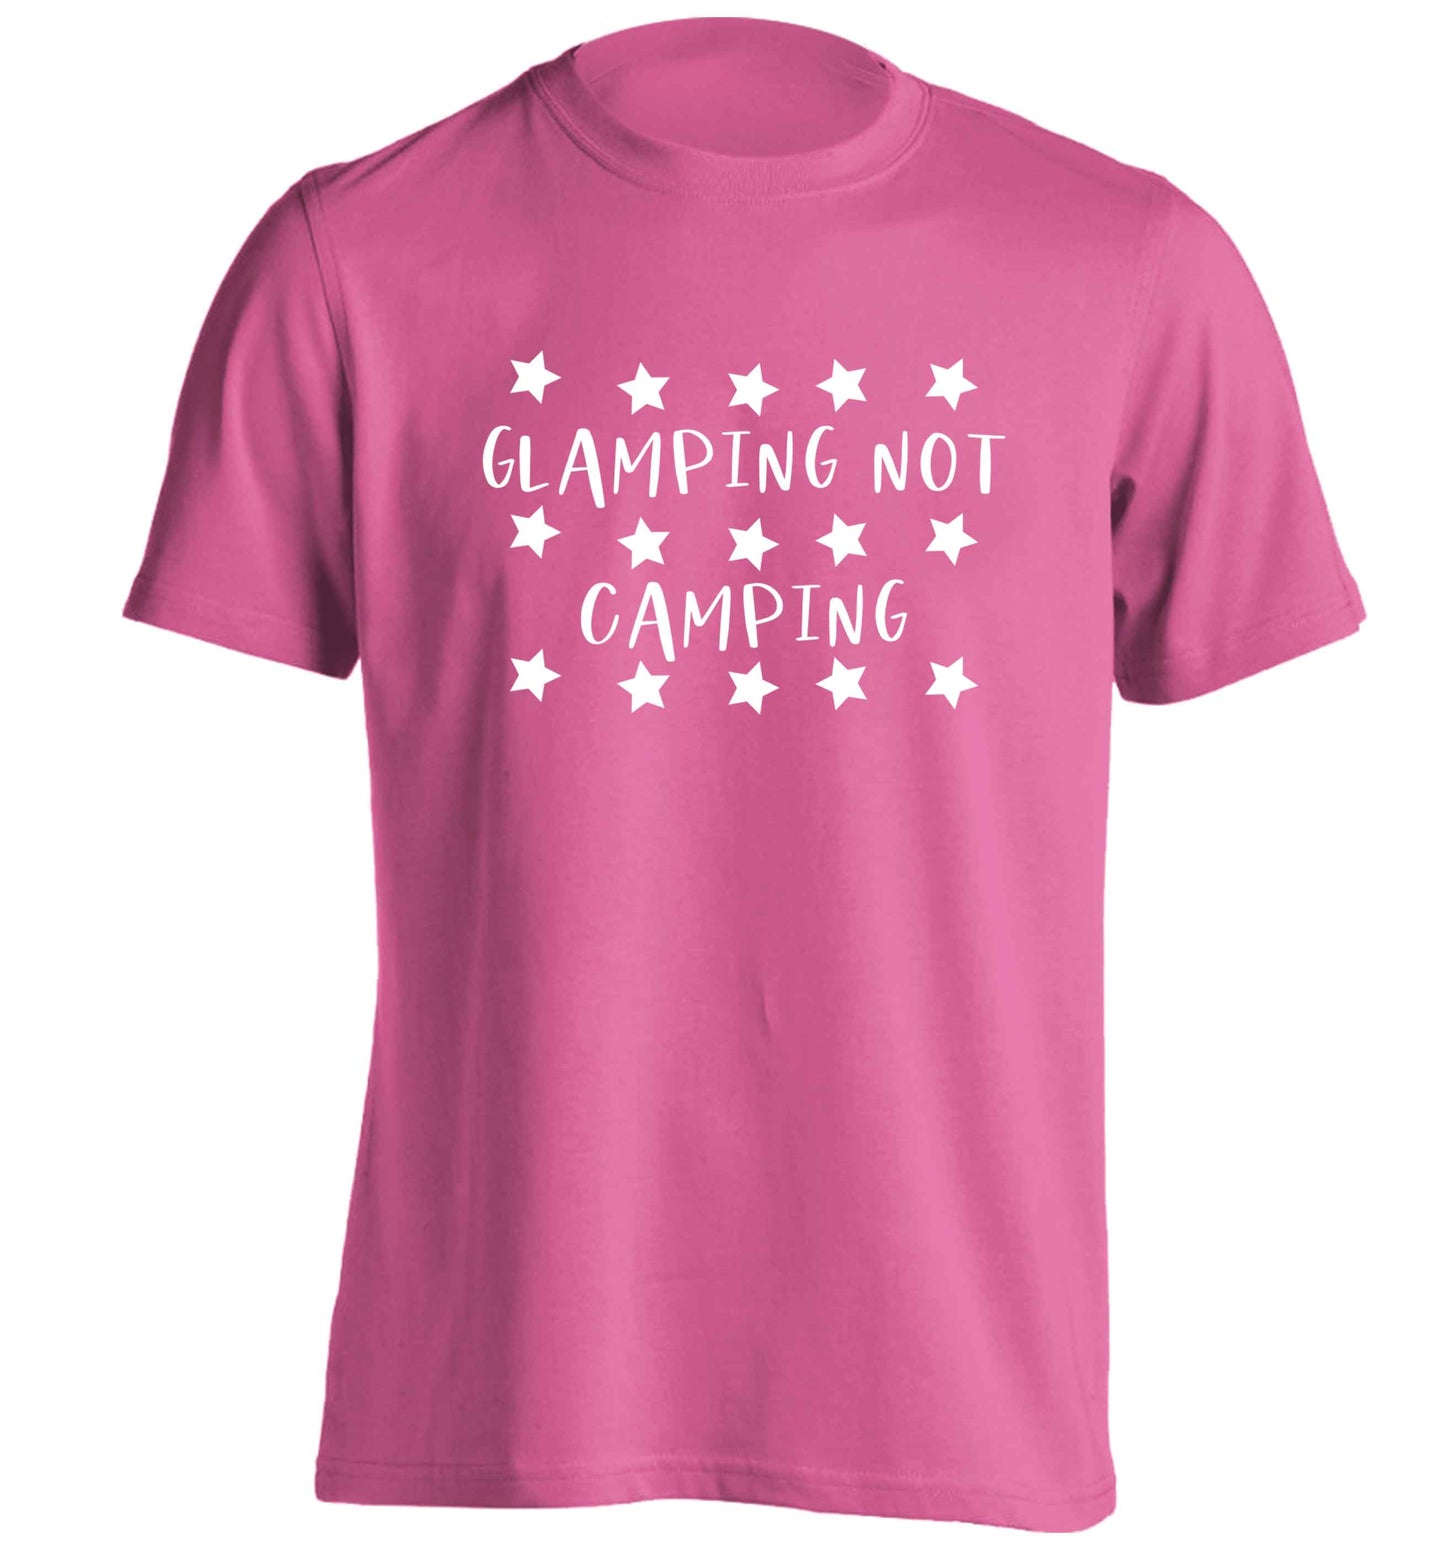 Glamping not camping adults unisex pink Tshirt 2XL